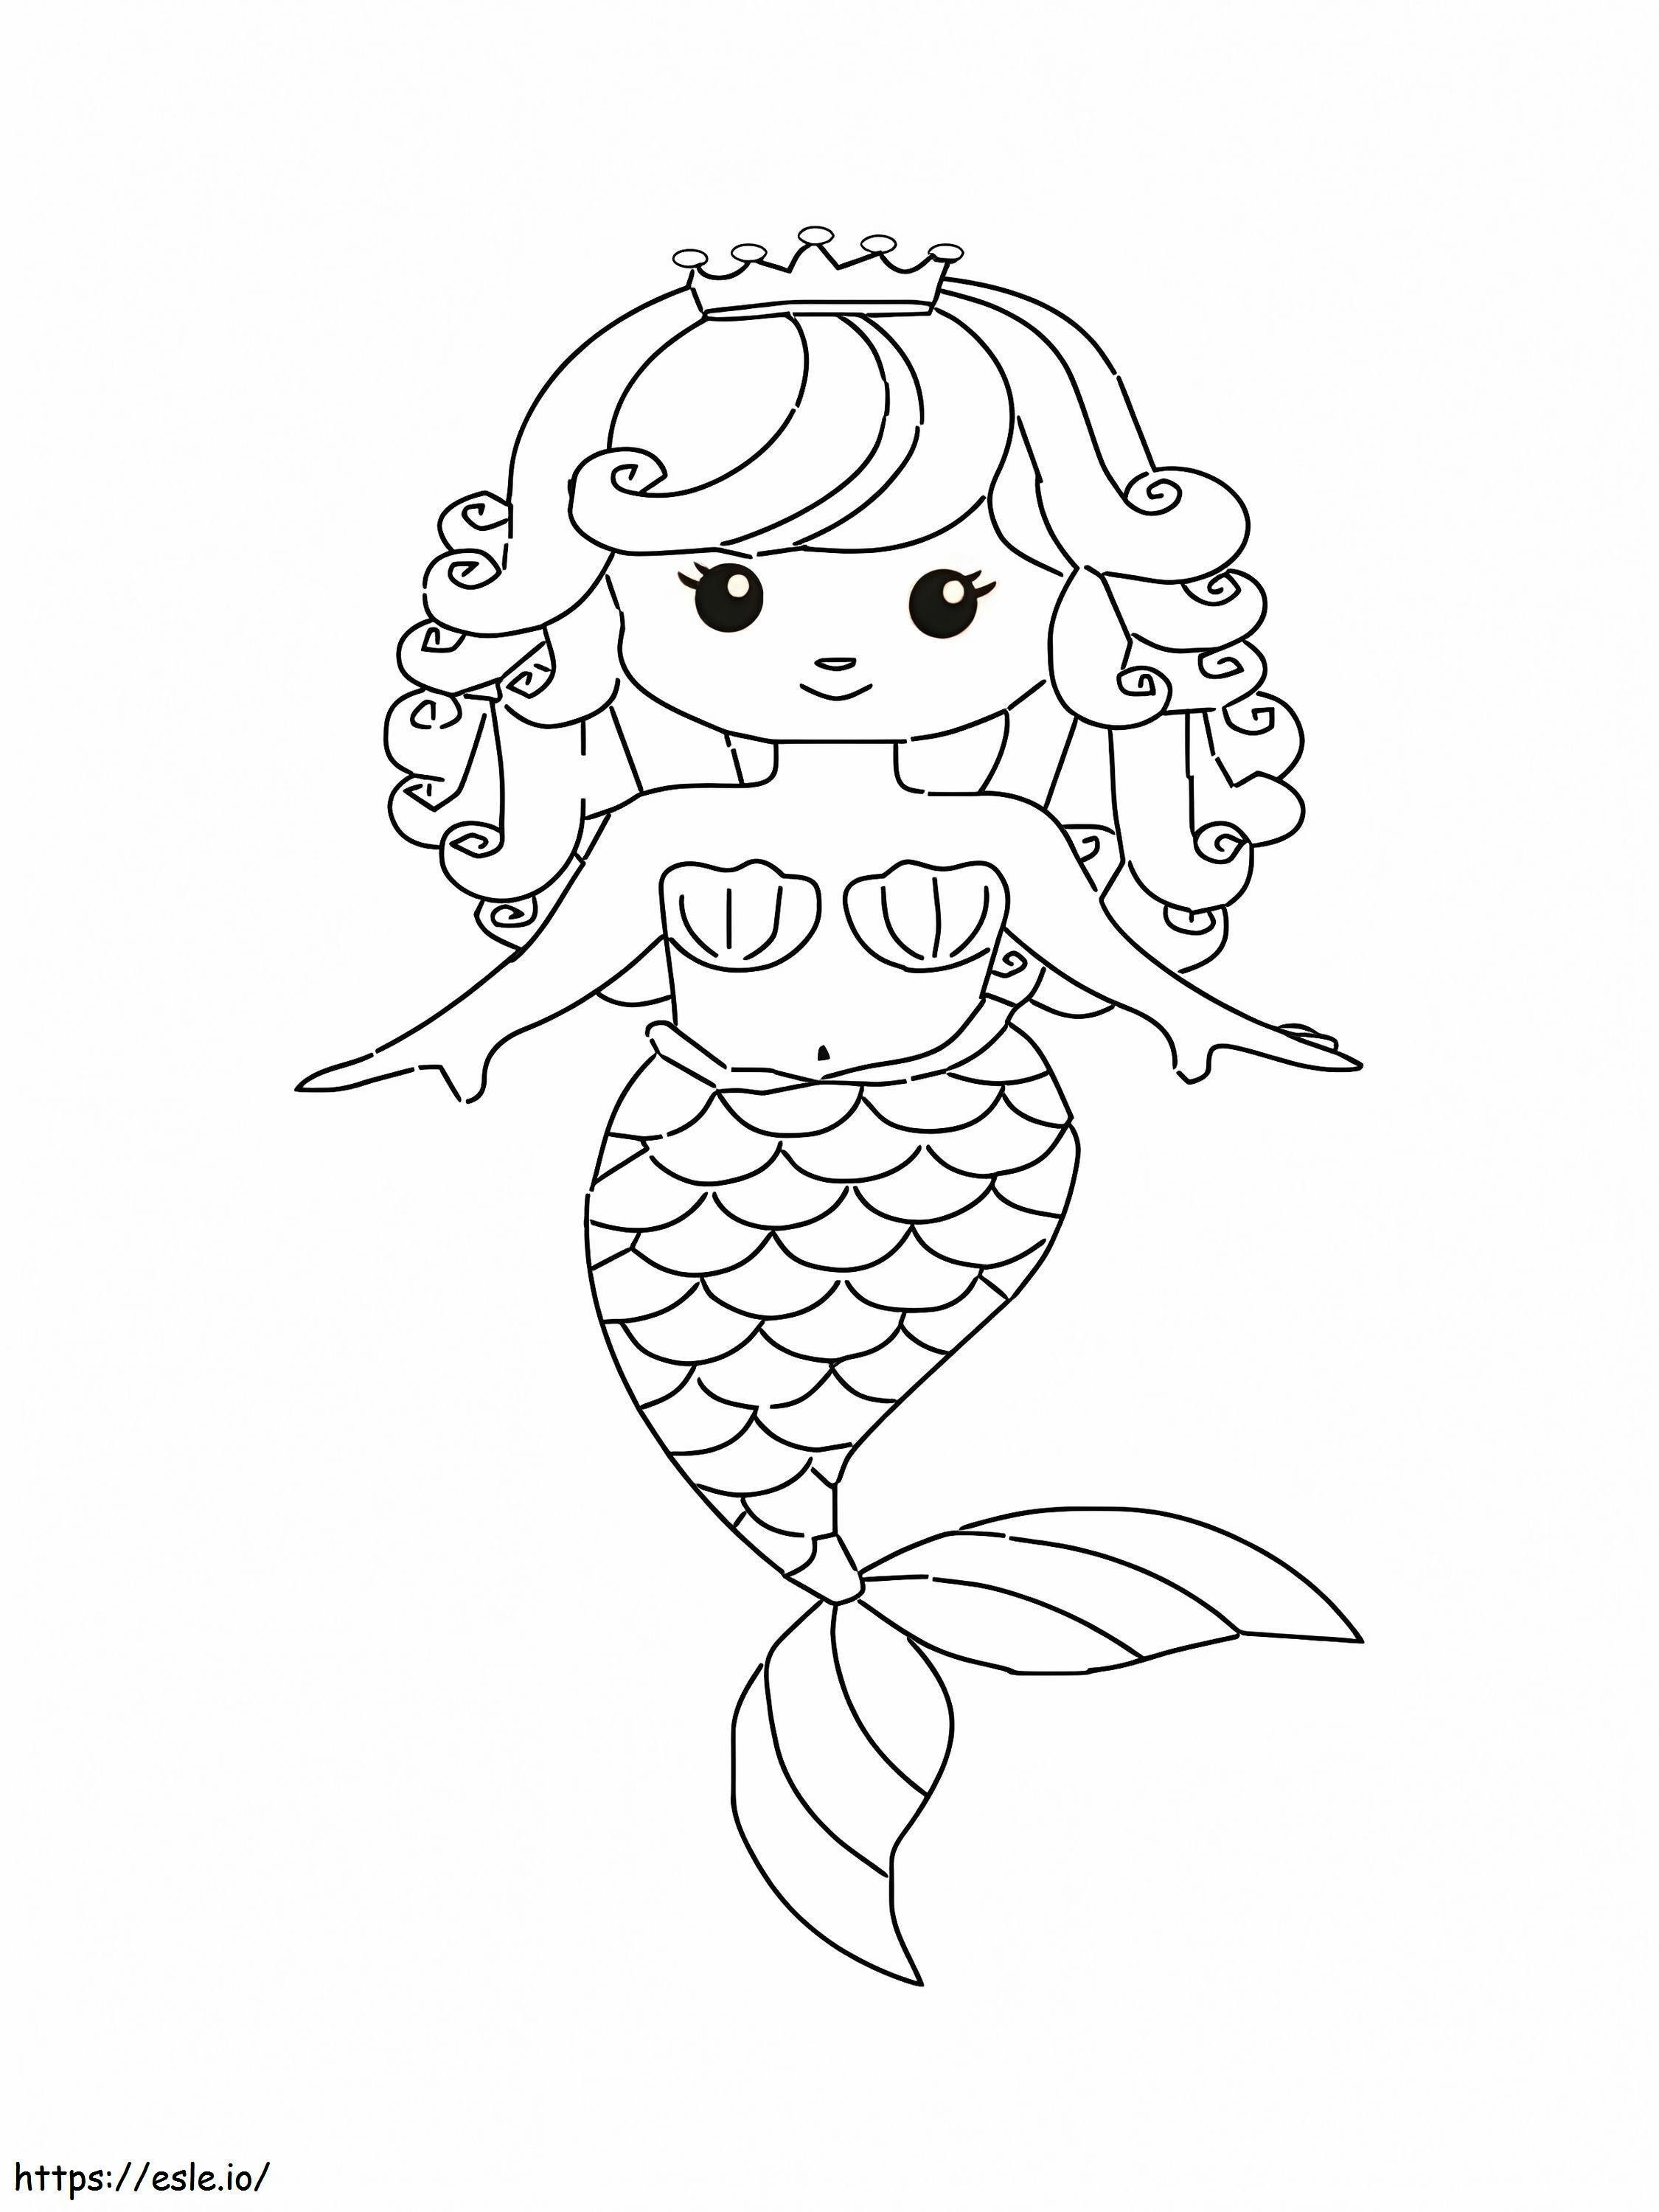 Mermaid With Curly Hair coloring page